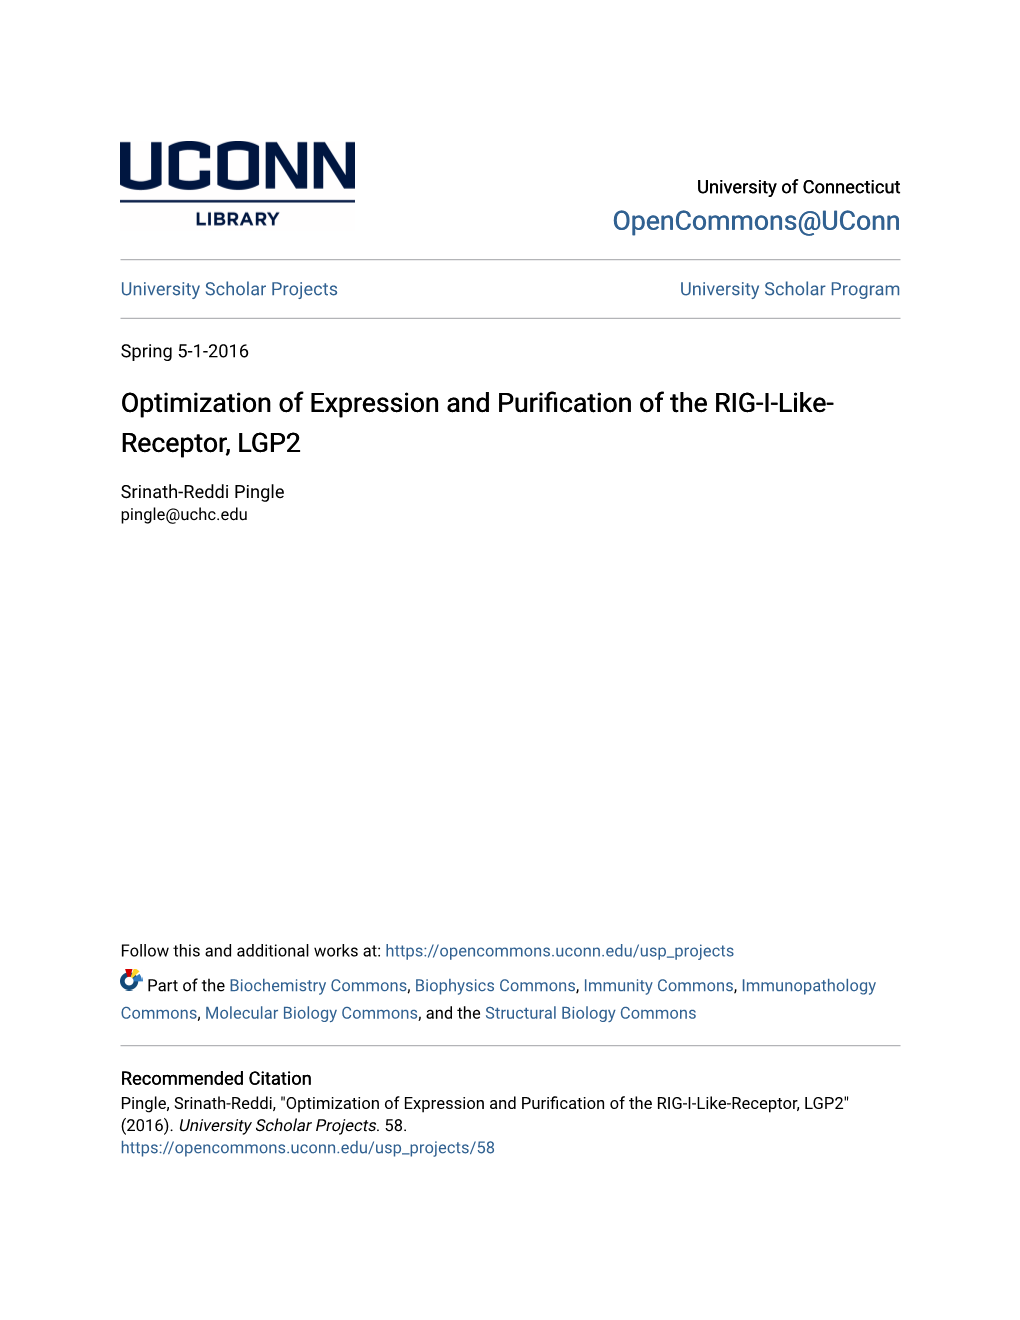 Optimization of Expression and Purification of the RIG-I-Like- Receptor, LGP2